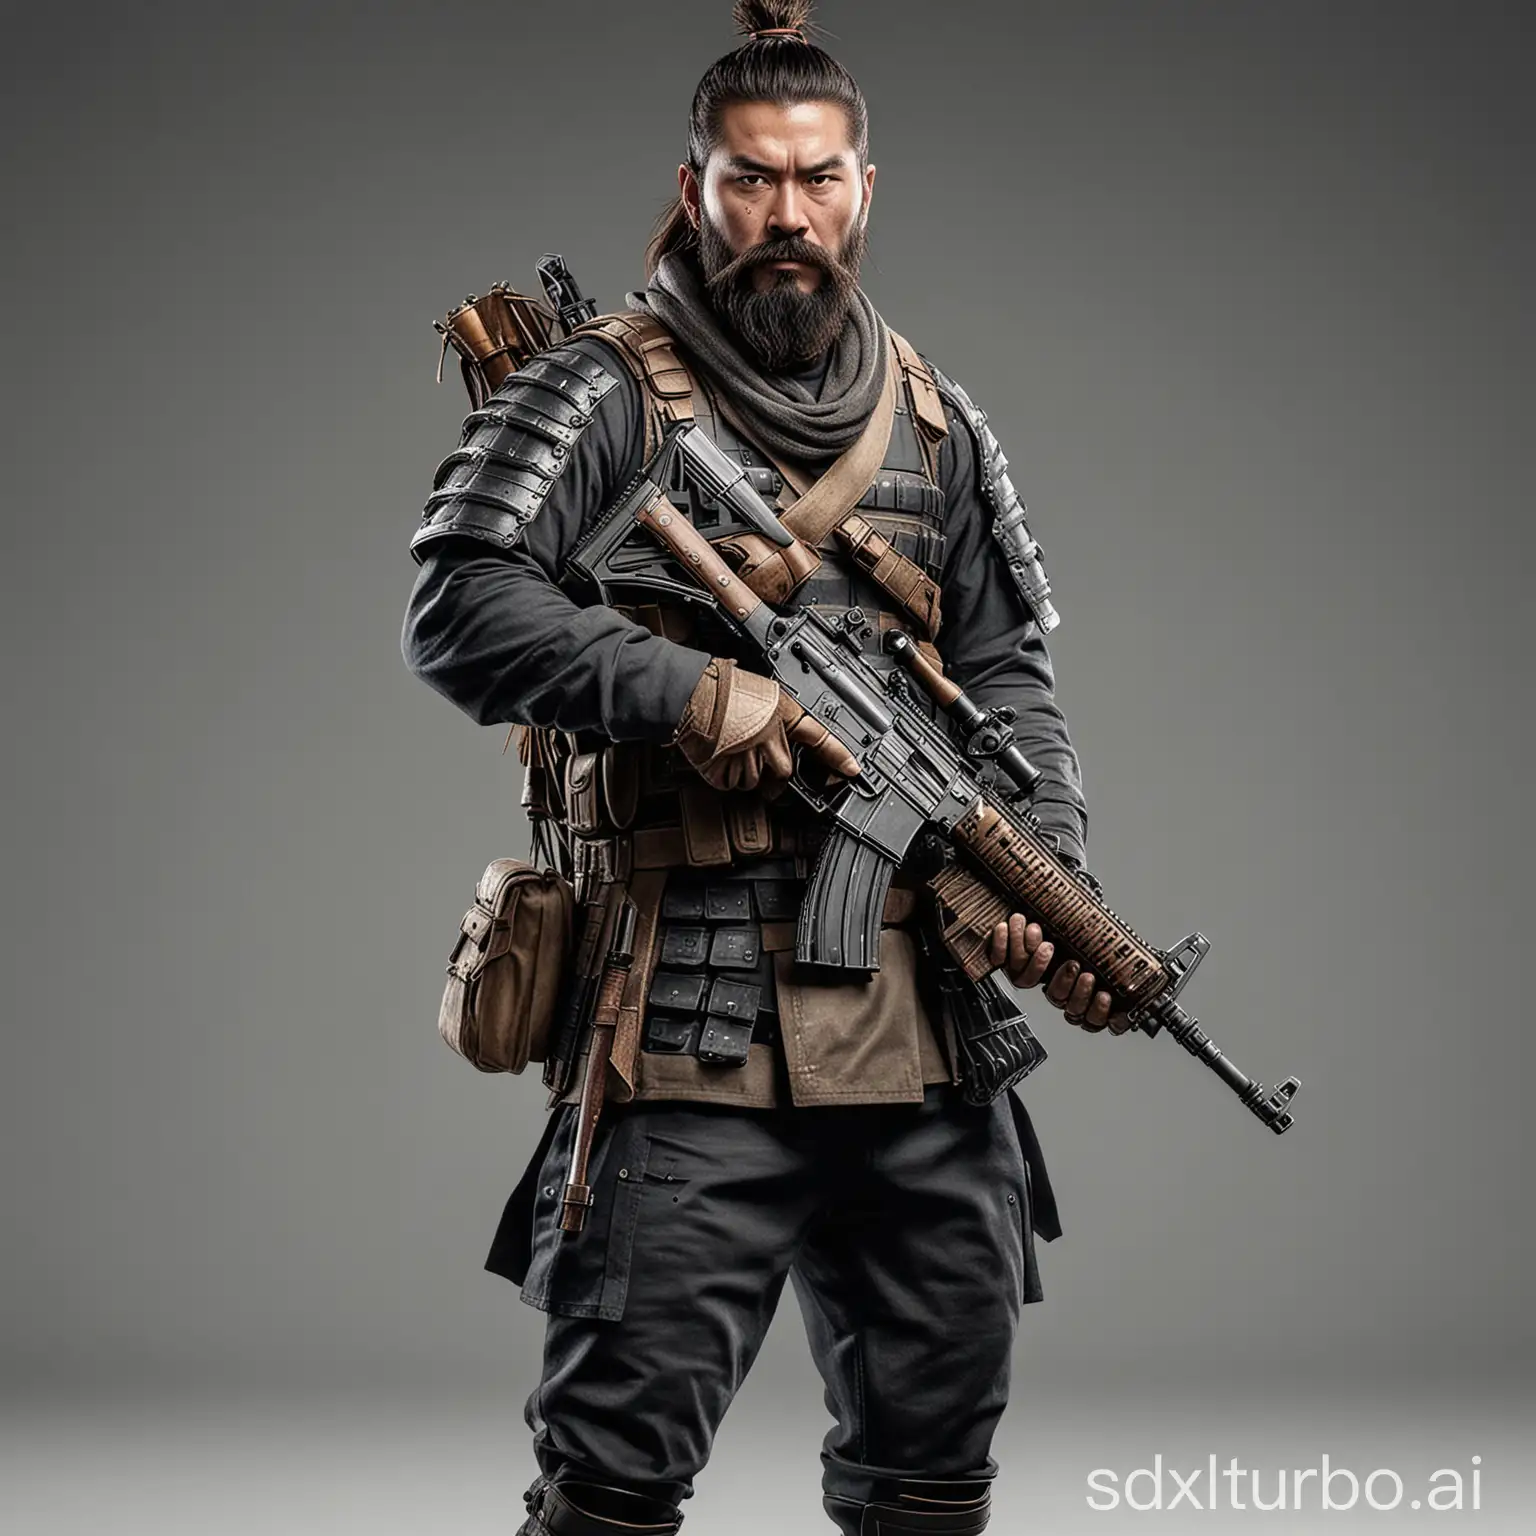 On a plain bacground is a A bearded samurai holding an assault rifle pubg with full armor in a full body portrait. This is a full body photo realistic high resolution image with sharp clean subject focus